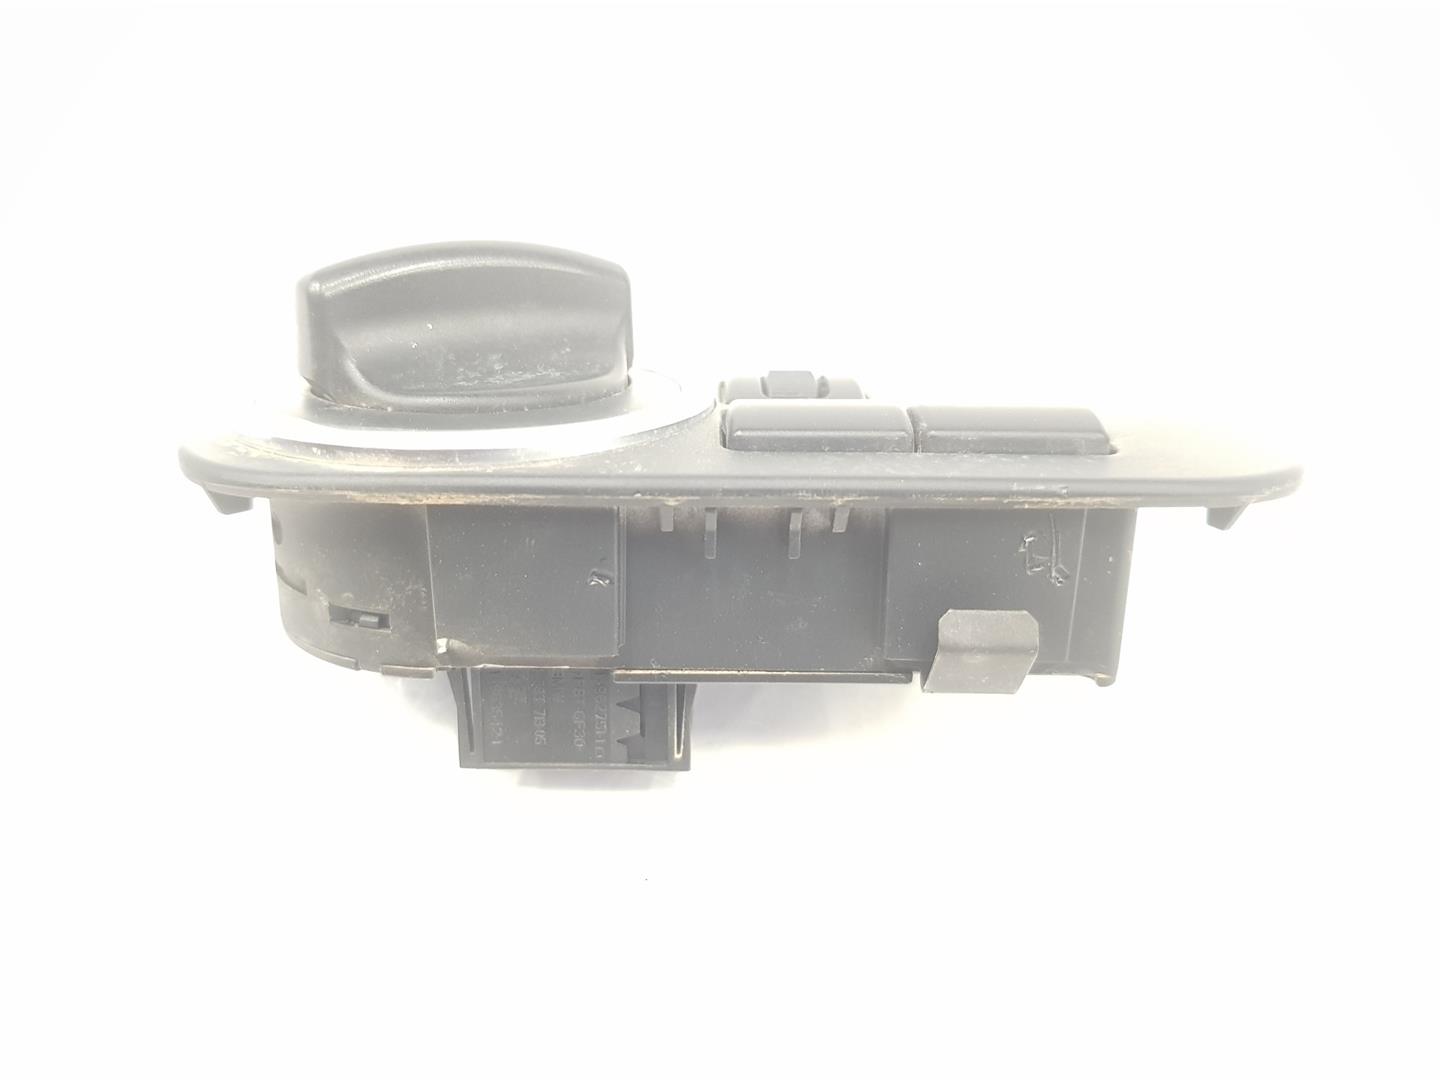 LAND ROVER Discovery 4 generation (2009-2016) Headlight Switch Control Unit LR010876, AH2213A024AC 24131194